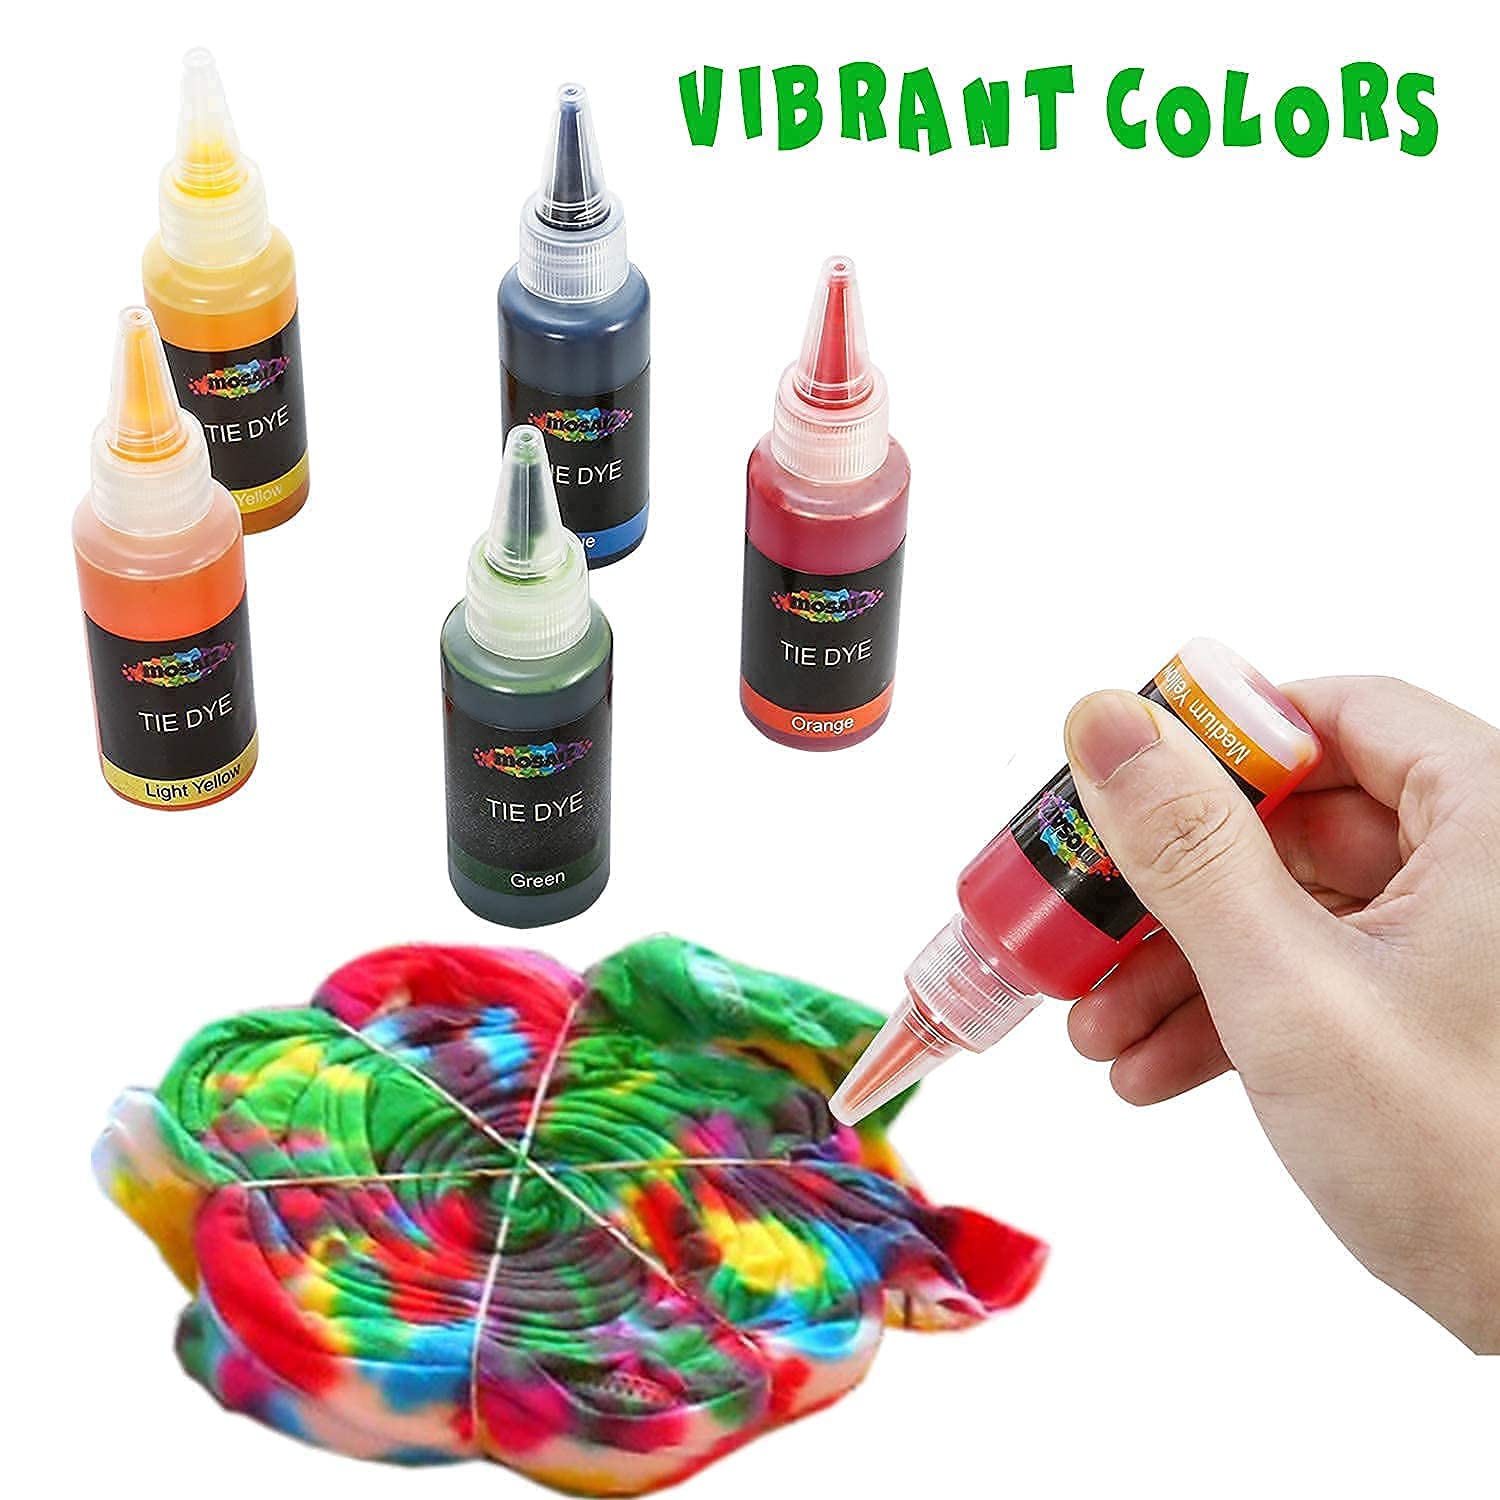 Mosaiz Tie Dye Kit 26 Colors with Spray Nozzles for Fabric Bundle with Face Paint Kit 16 Colors Including Metallic Gold and Silver Colors, 2 Hair Chalk, 3 Brushes, 260 Adhesive Gems and 100 Stencils